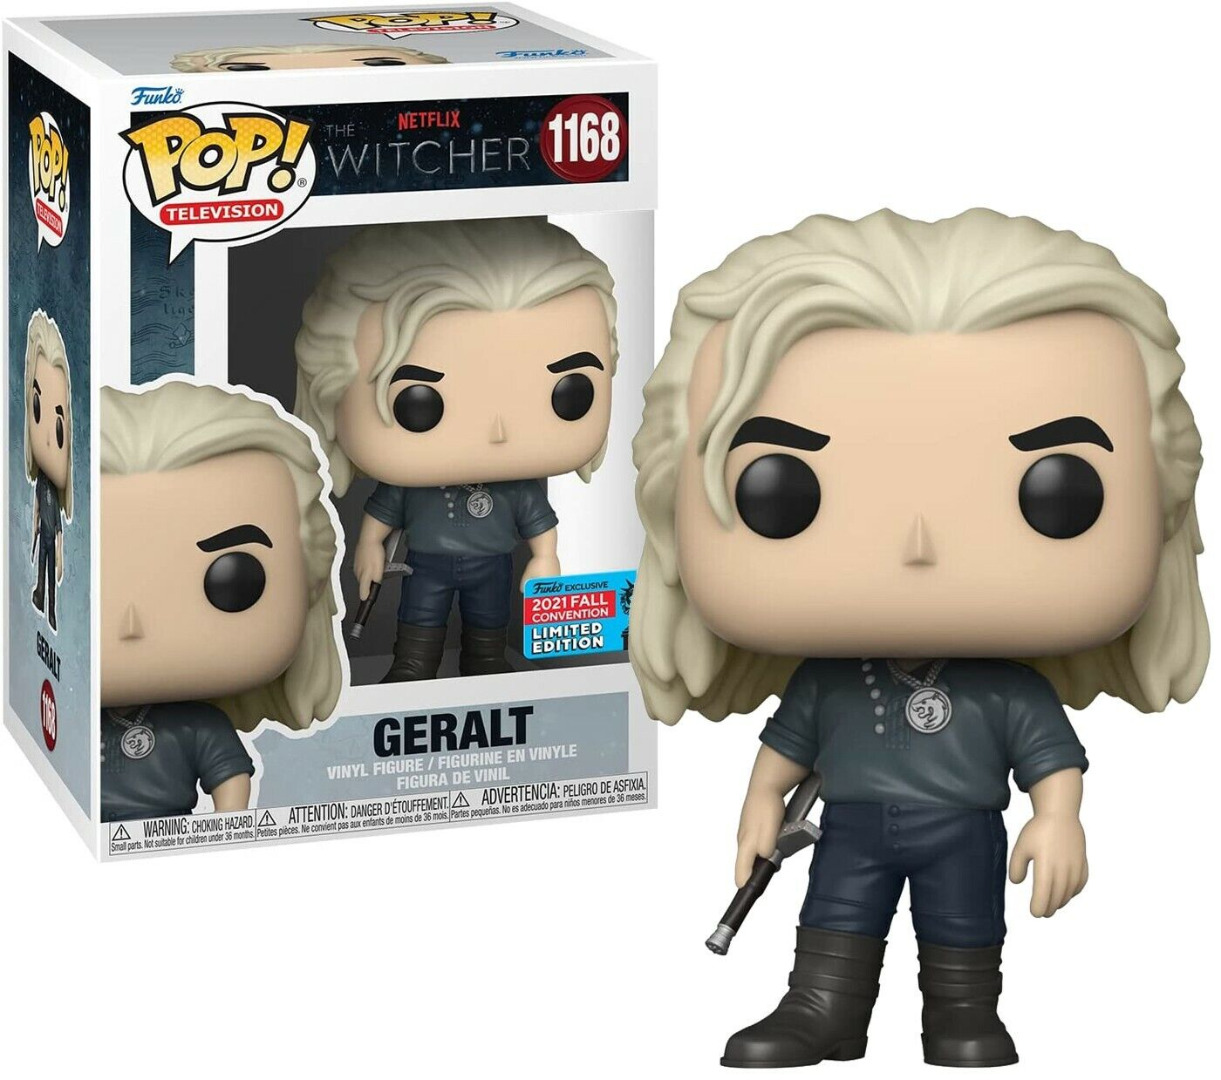 Funko POP! The Witcher: Geralt Limited Edition 9 cm